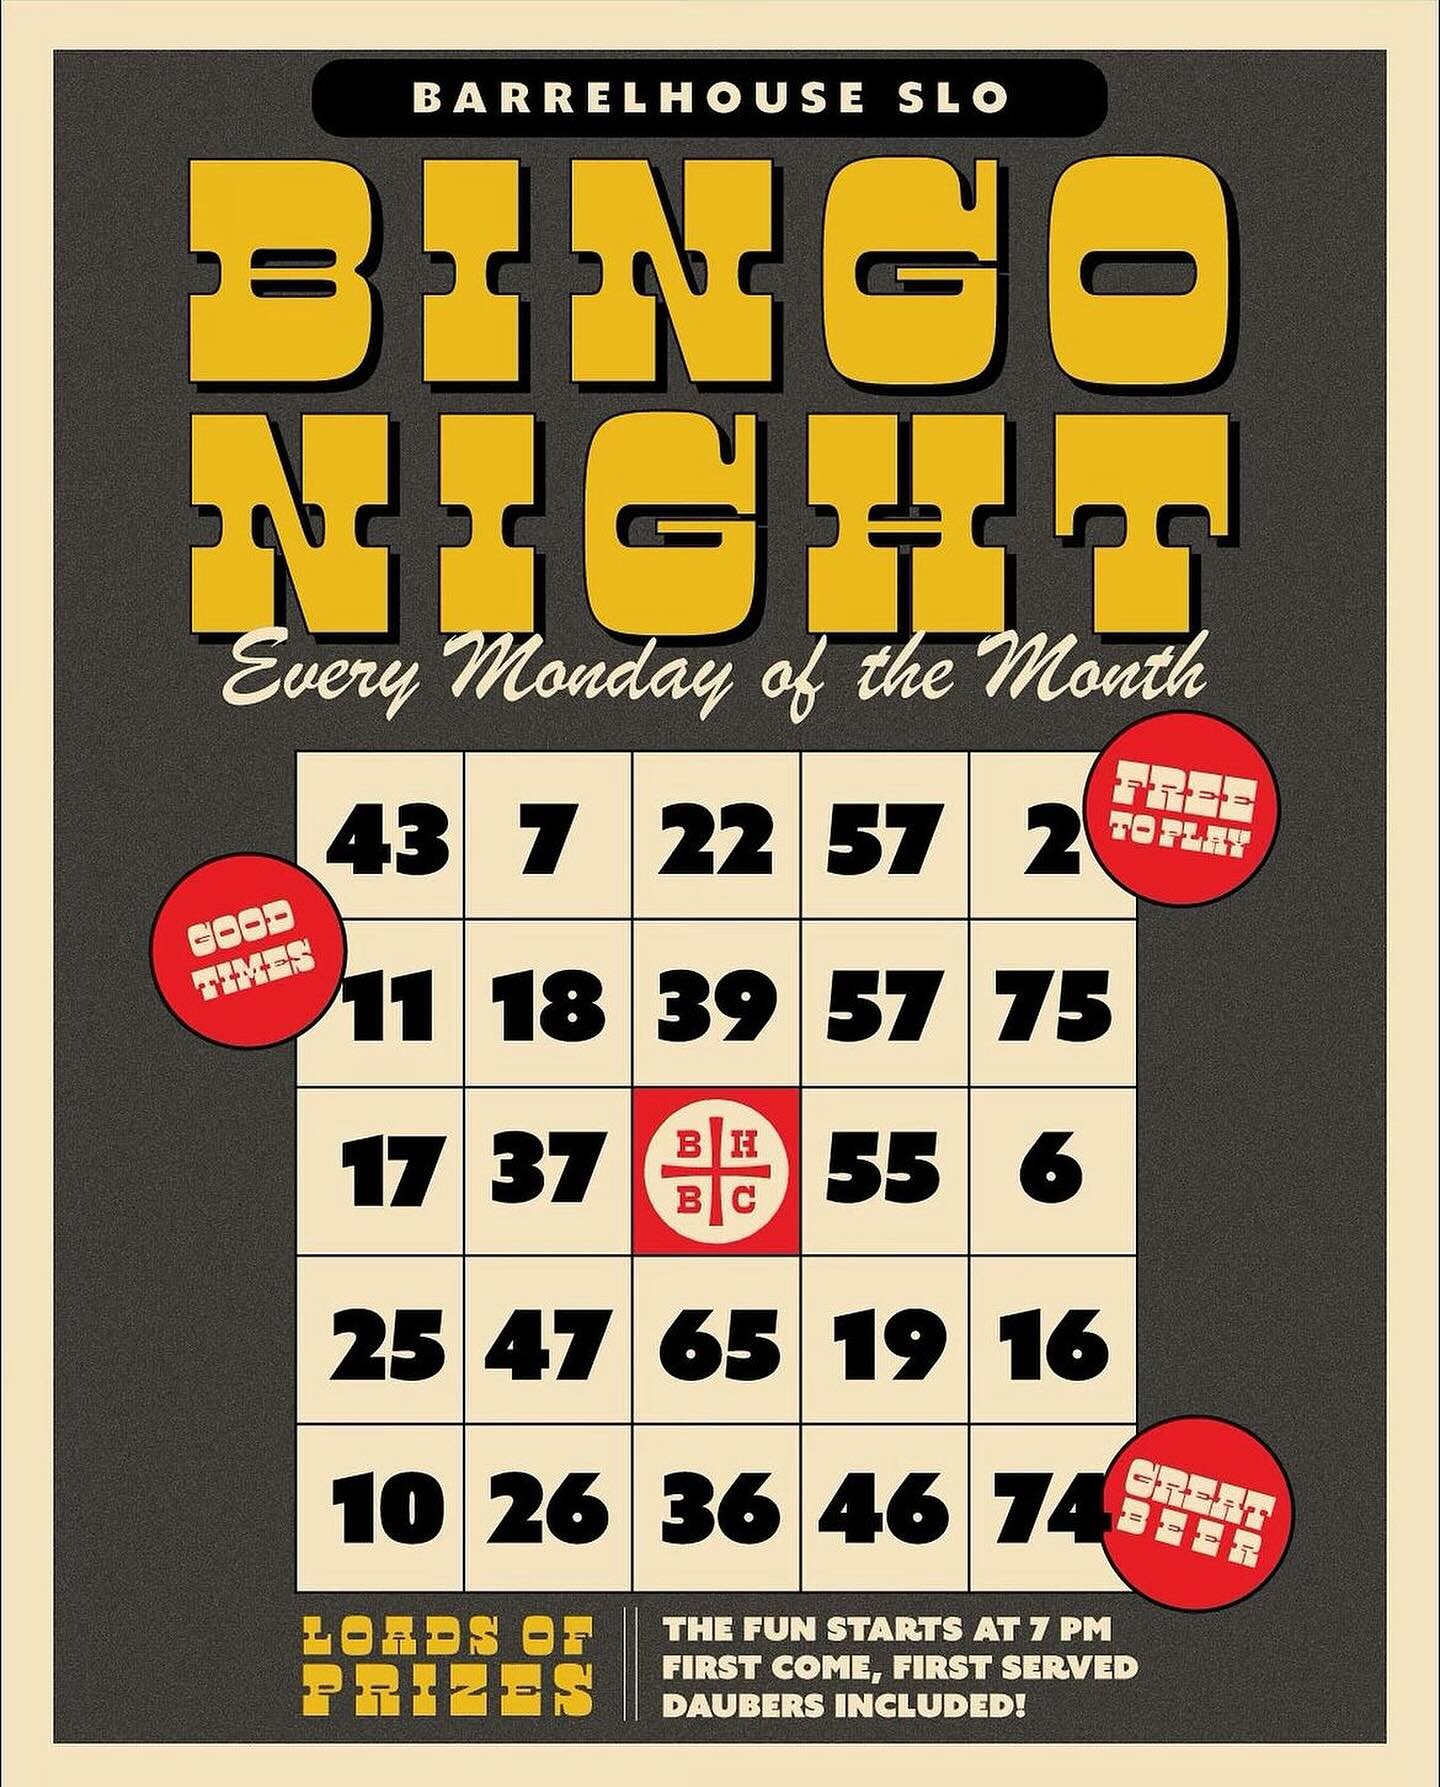 Start off your week the right way with BINGO!🍻
Bingo is every Monday from 7-9pm! 

Other happenings at bhbc slo this week
Monday: BINGO 
Tuesday: SLOCALS NIGHT 
Discount beers all night! $2 off Flagship beers and Seltzers// $1 off BIG SUR DIPA
Wedne